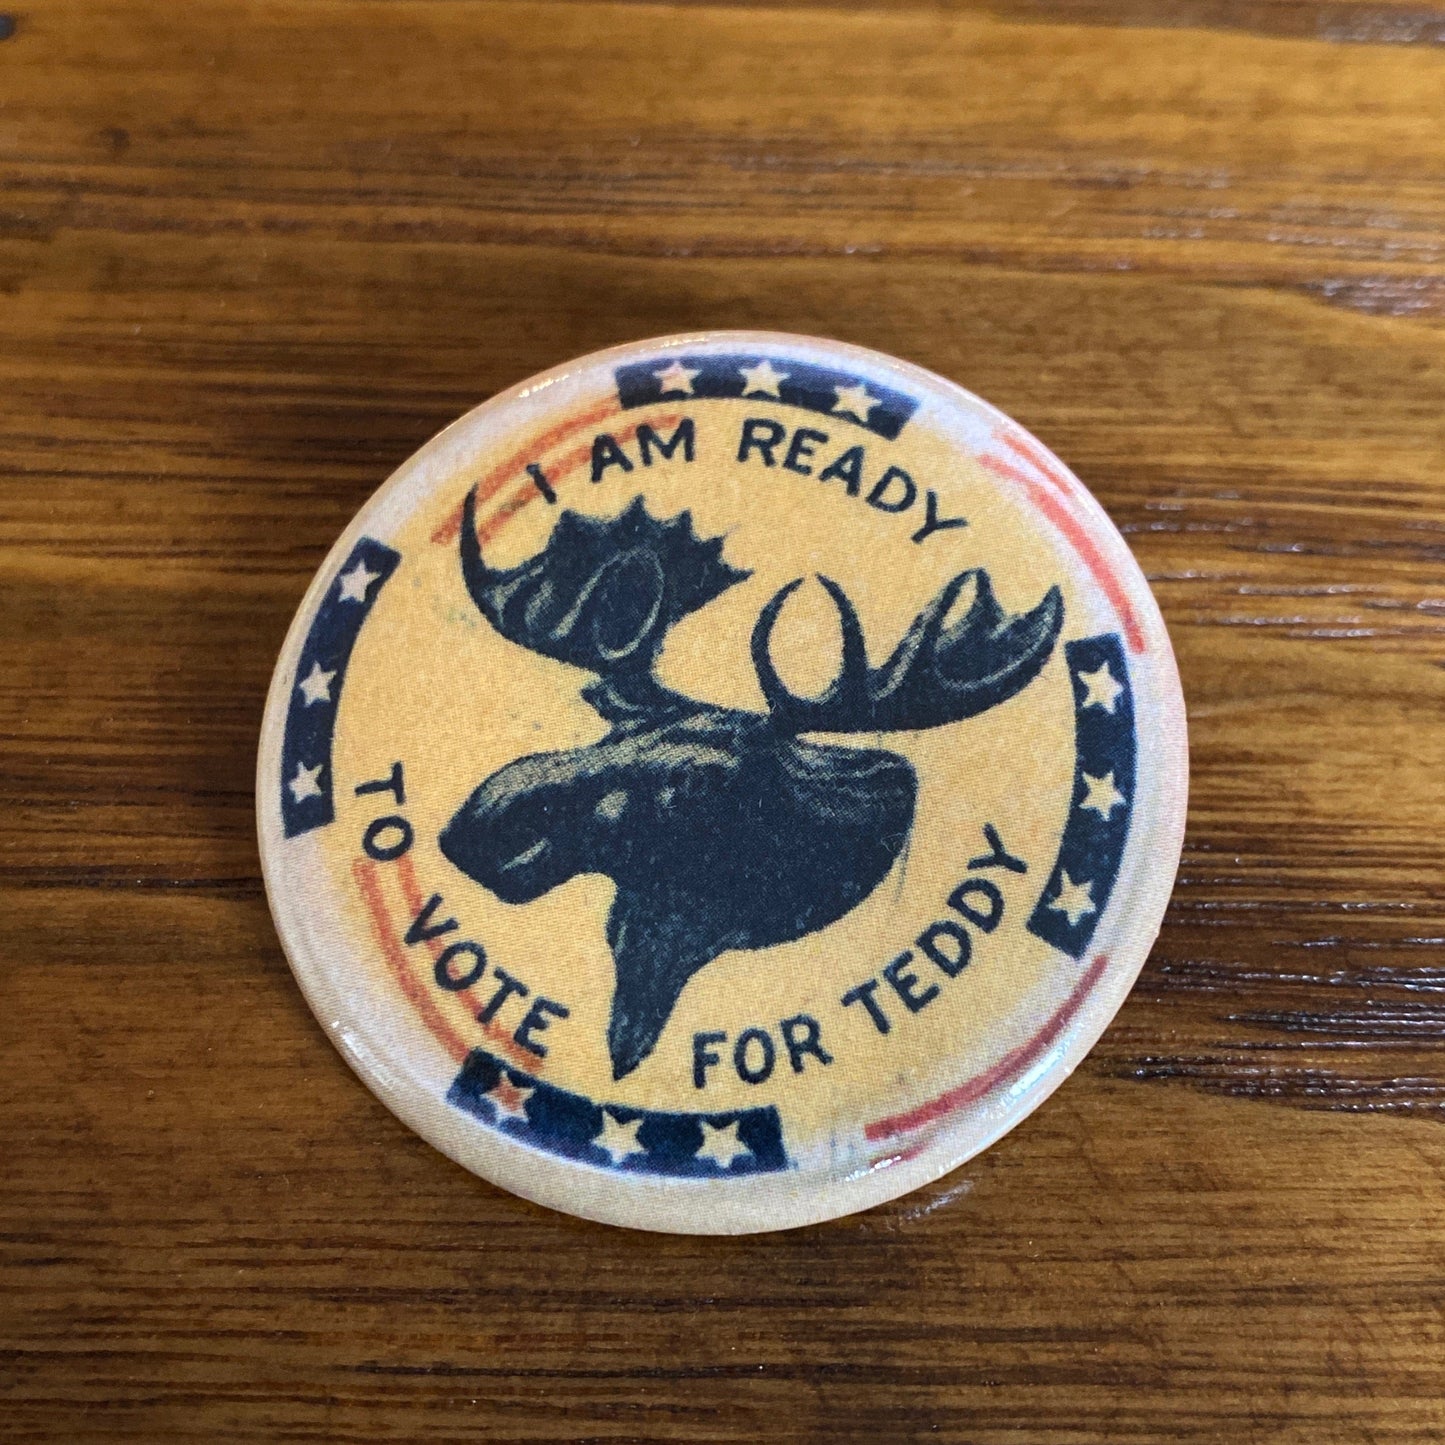 Teddy Roosevelt “I’m ready to vote for Teddy” presidential campaign button